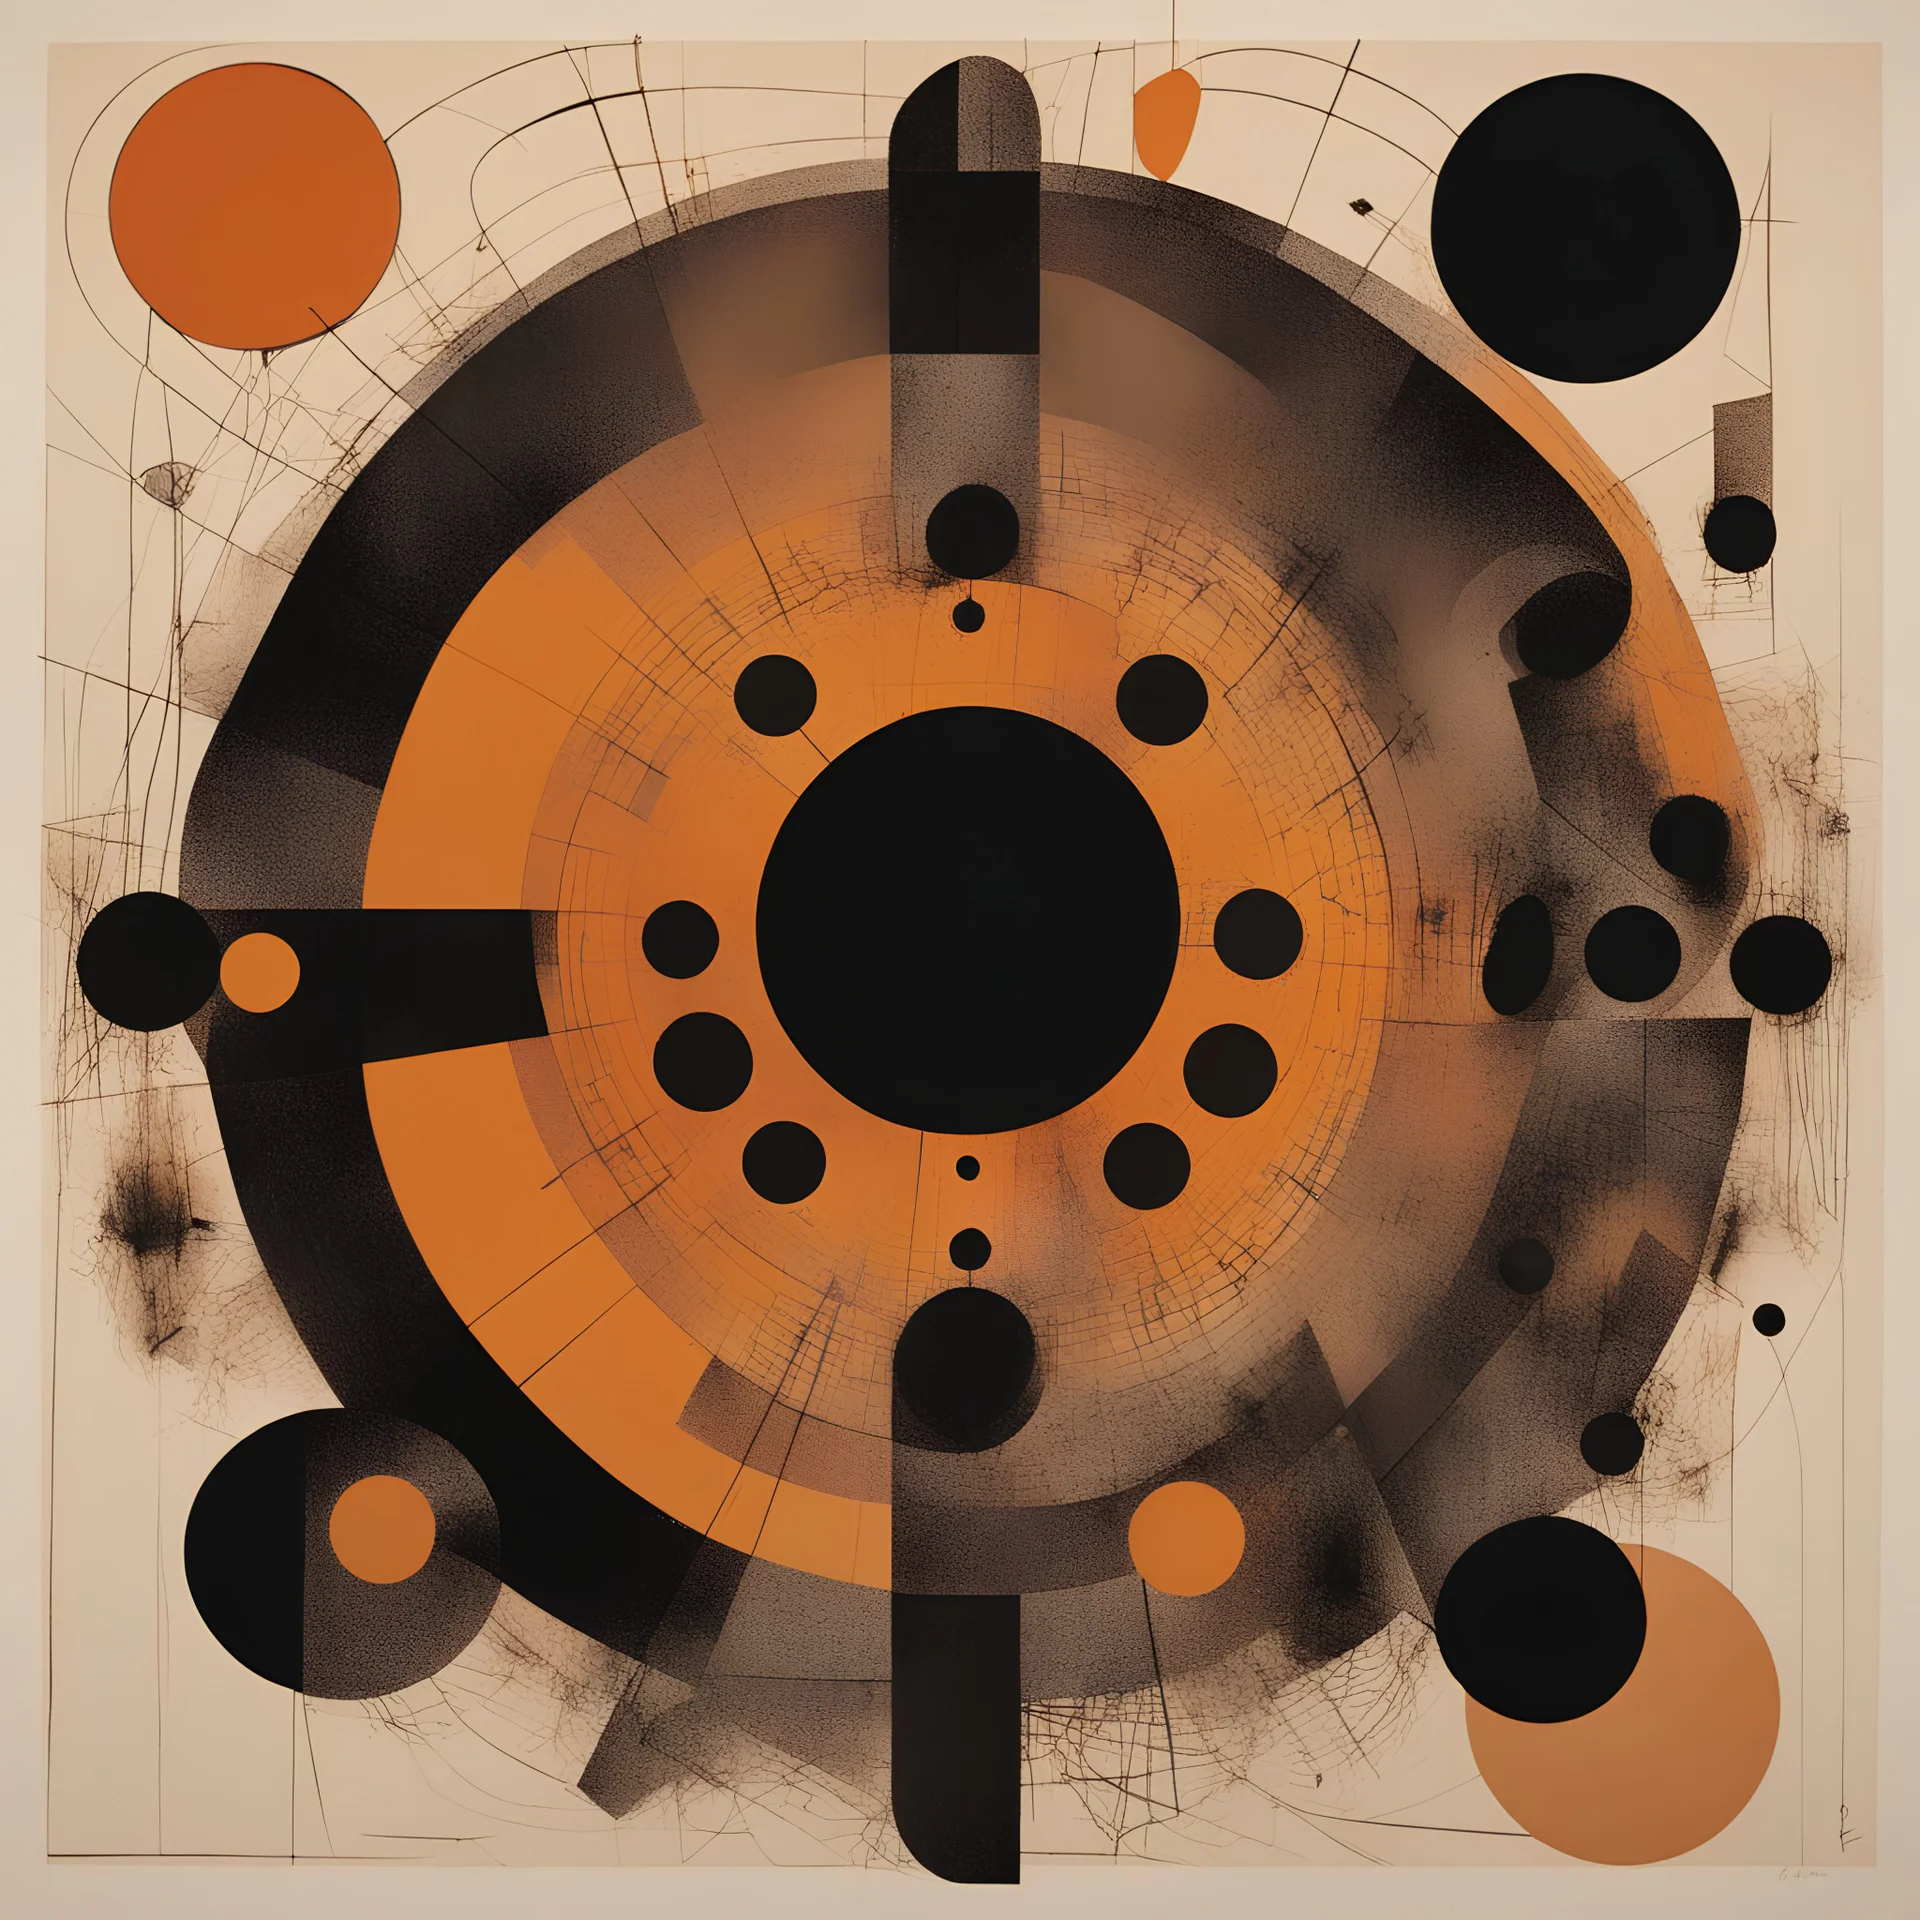 nyctophobia nightmare, abstract geometric art, by Ray Johnson, mind-bending illustration; asymmetric, 2D, warm colors, dark shine burn, precise angles and bisected circles